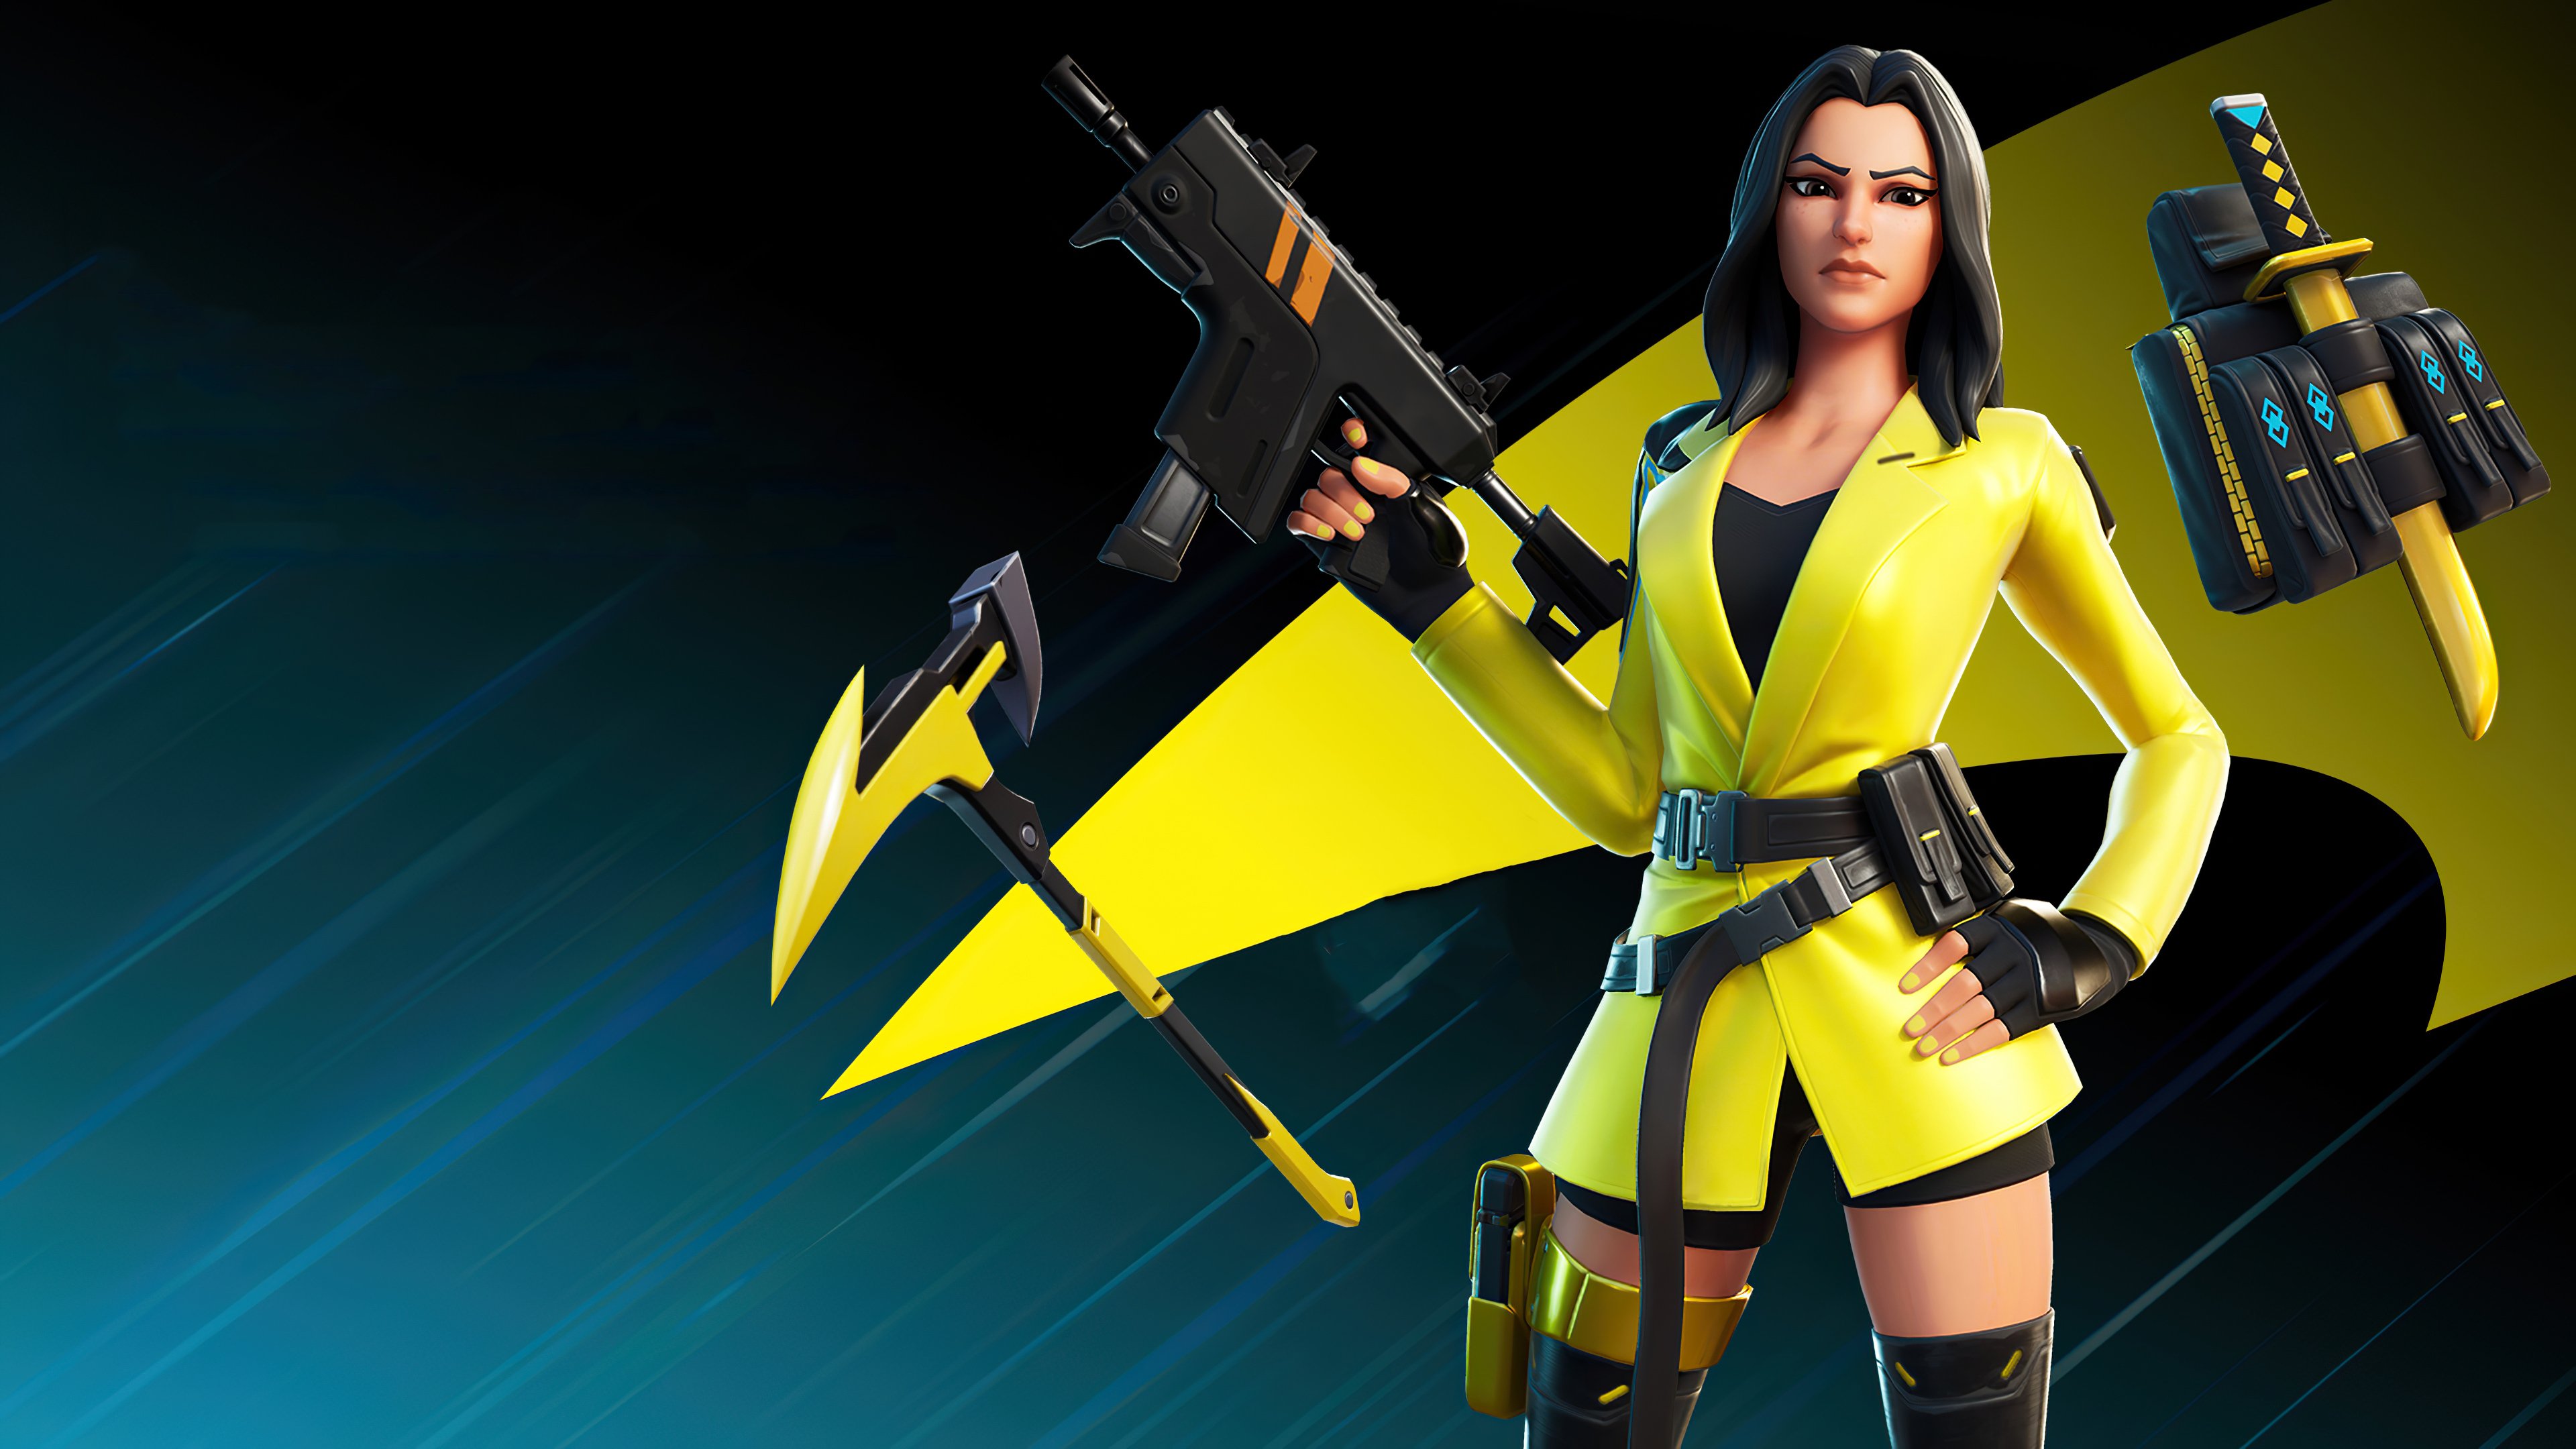 Yellow Jacket Fortnite HD Games, 4k Wallpaper, Image, Background, Photo and Picture